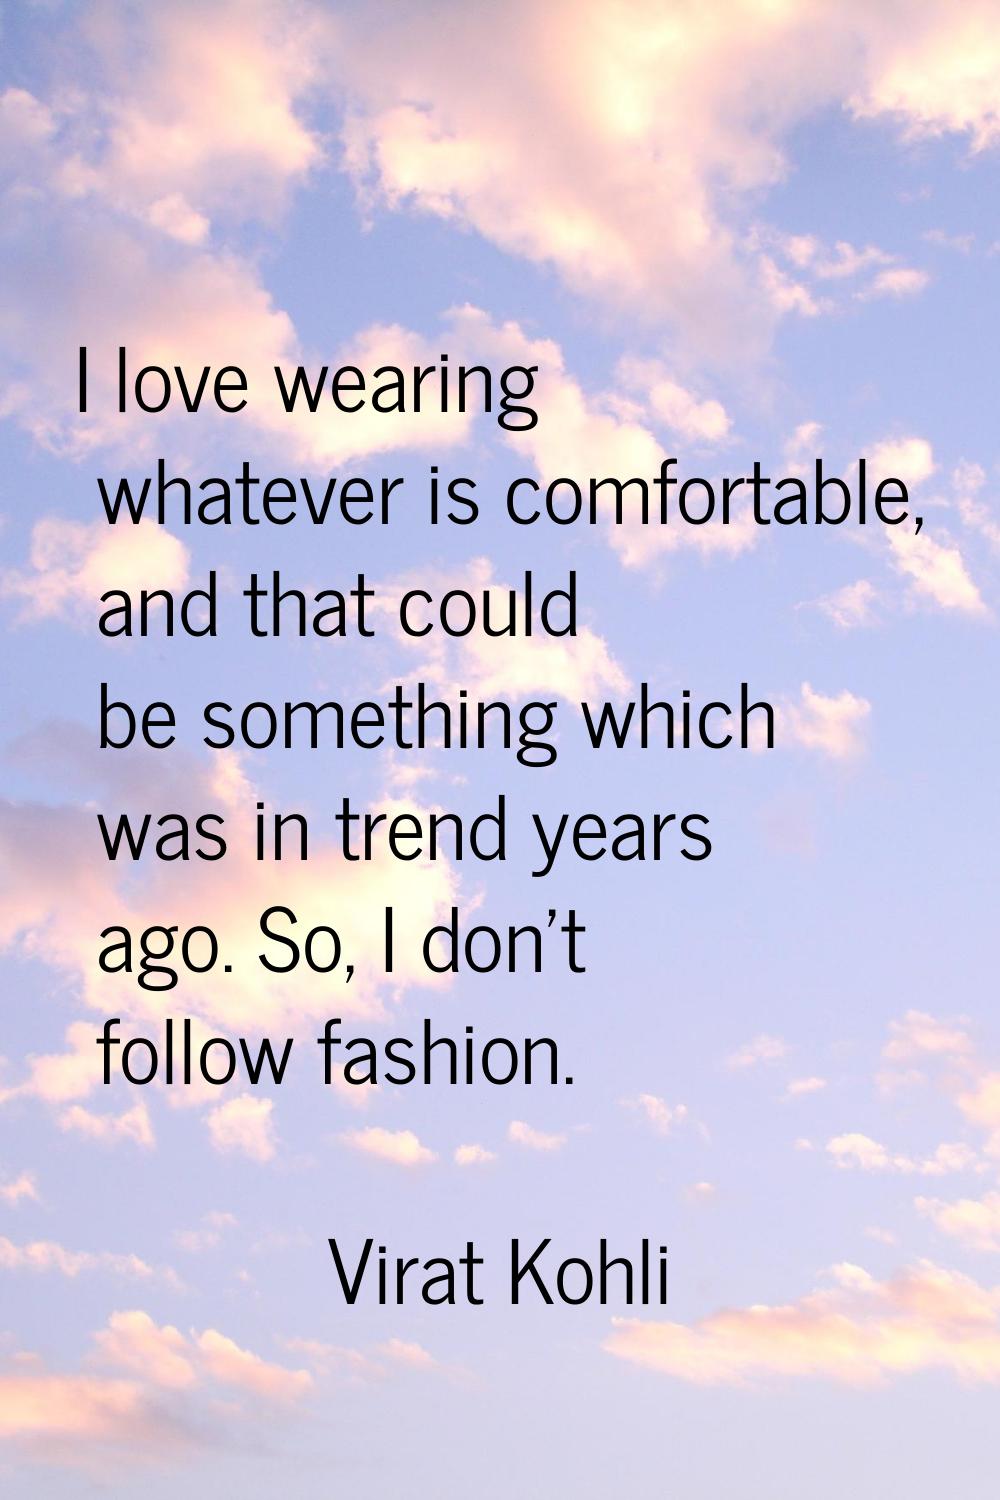 I love wearing whatever is comfortable, and that could be something which was in trend years ago. S